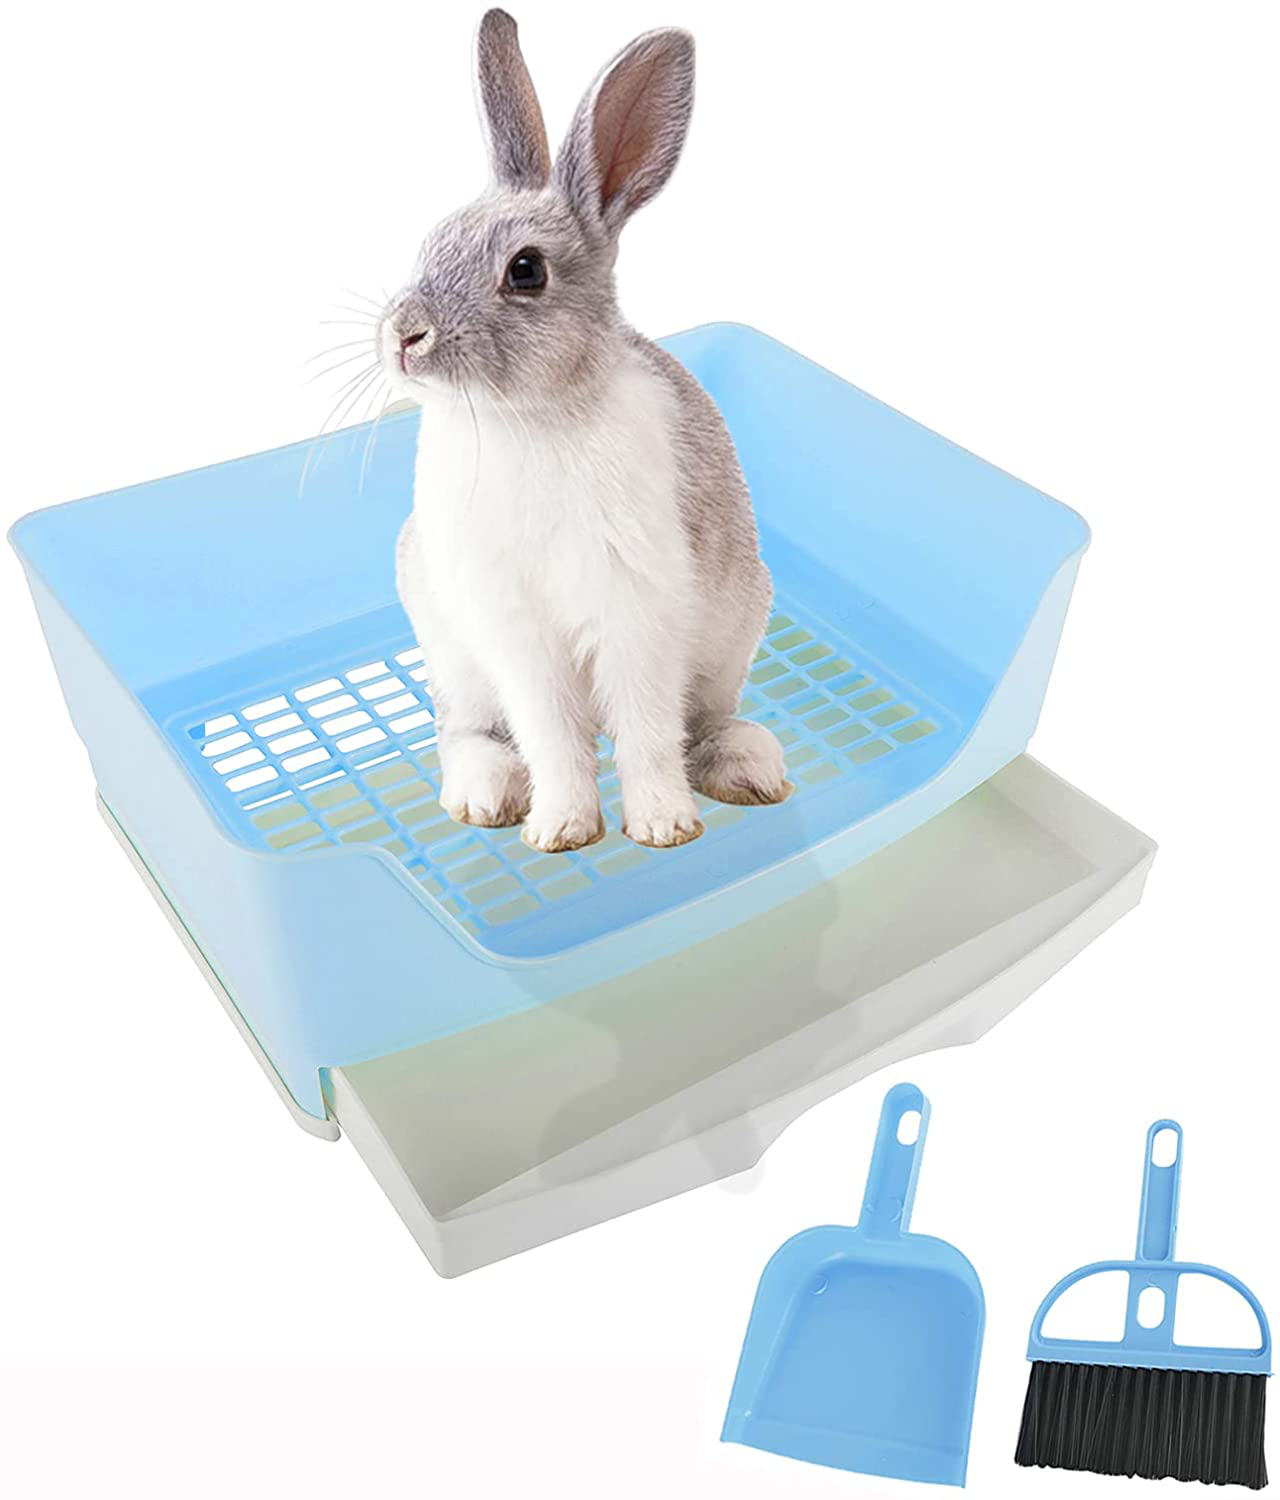 Sparkfire Large Rabbit Litter Box Trainer 16" × 11.8", Potty Corner Toilet with Drawer Bigger Pet Pan for Adult Hamster, Guinea Pig, Chinchilla, Bunny and Other Small Animals